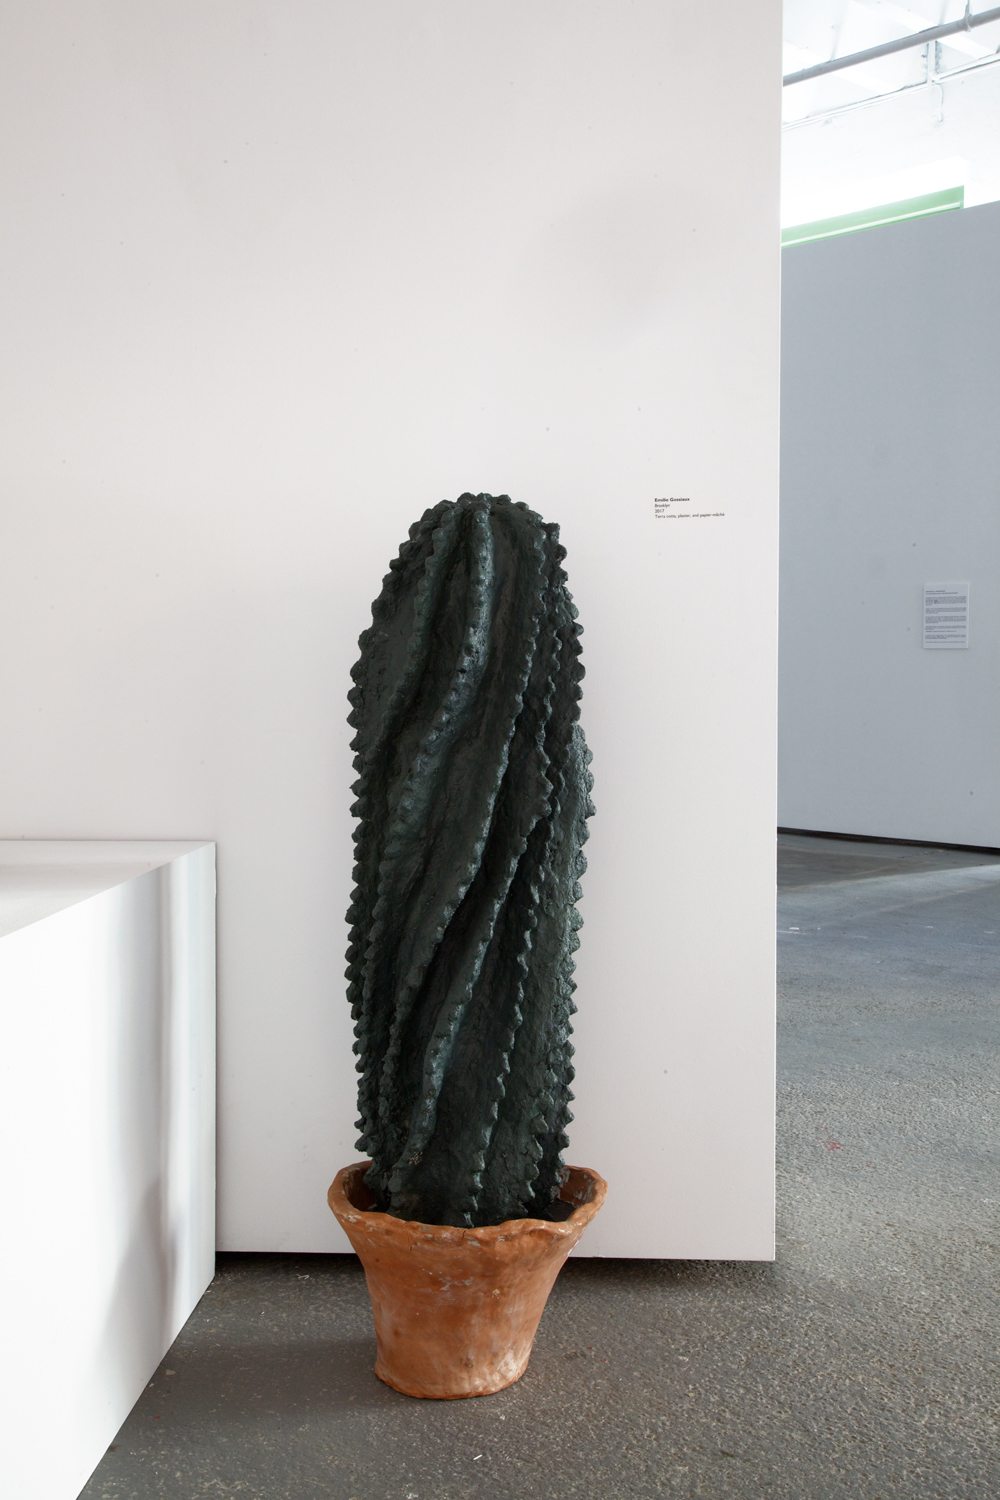 Installation image of a sculpture of a cactus